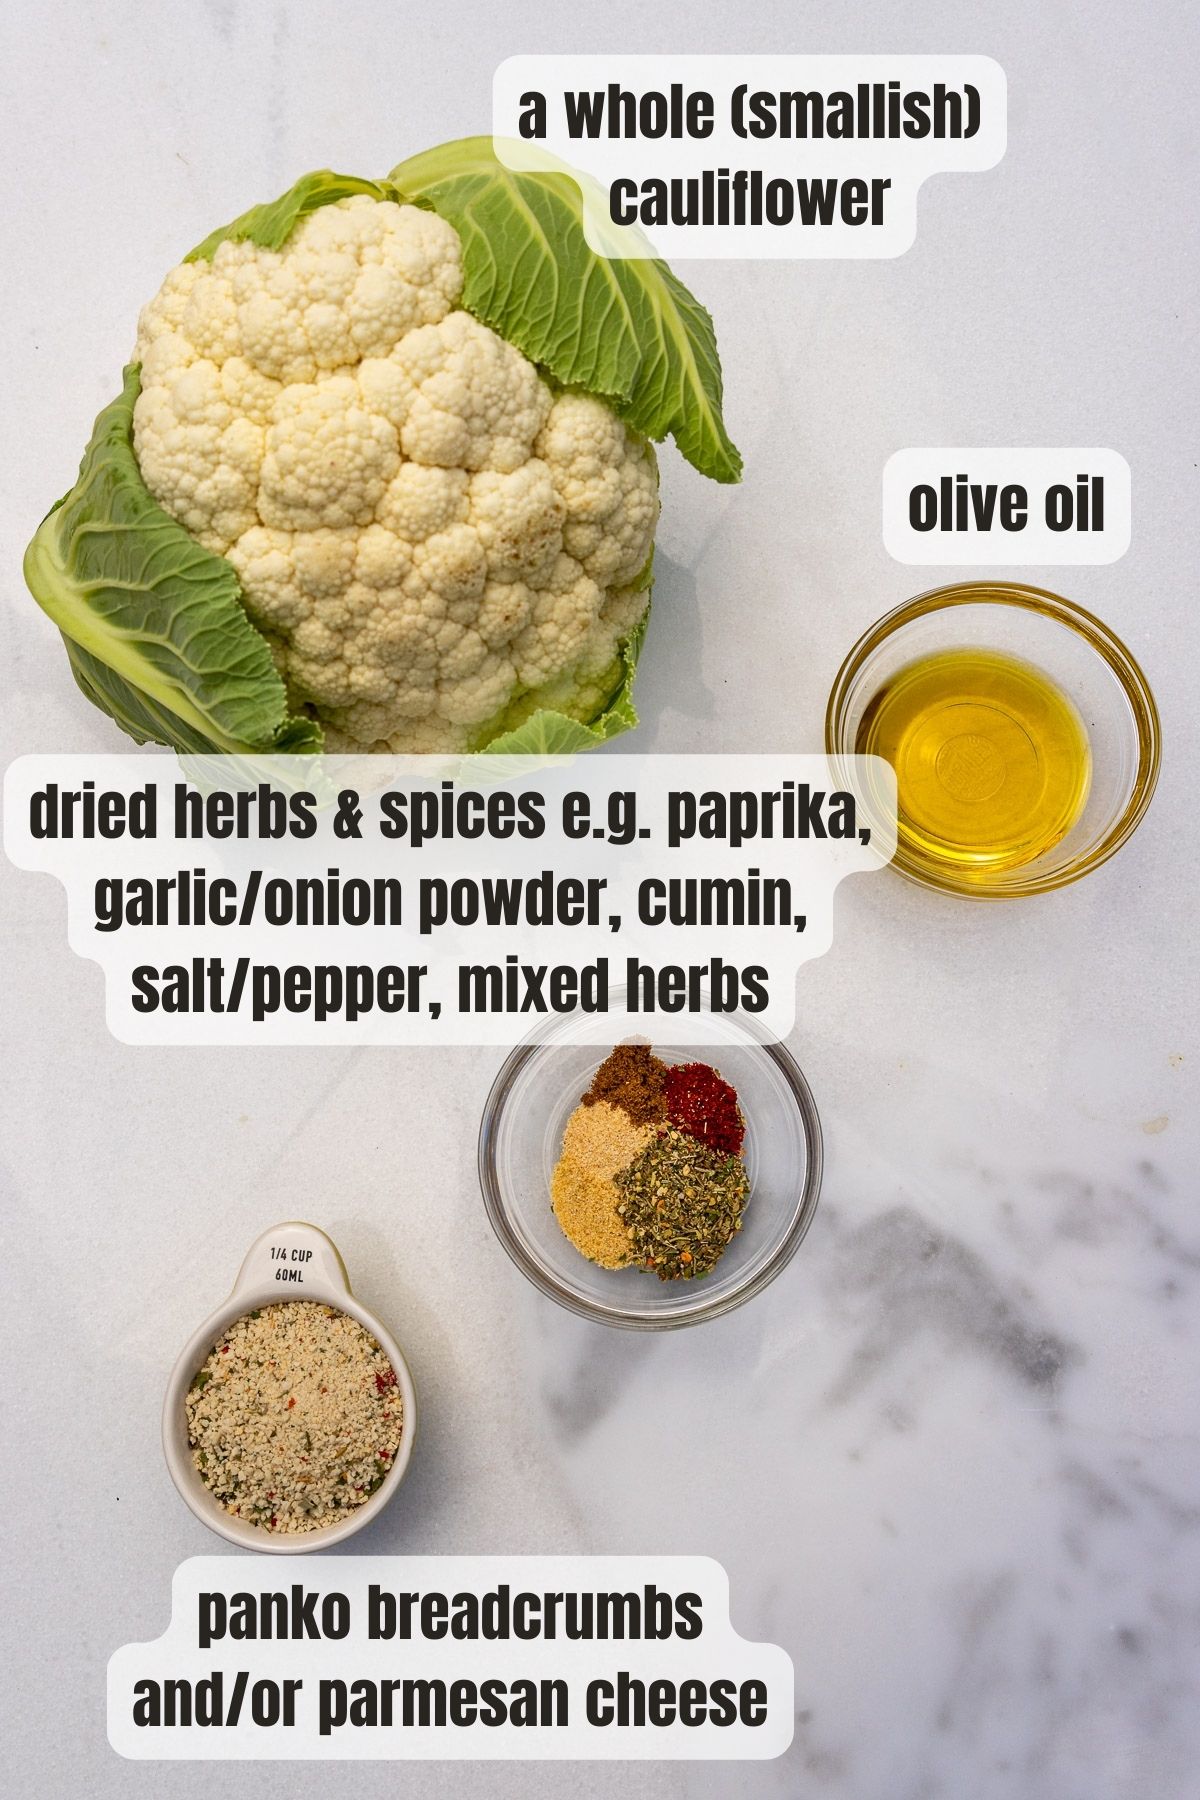 All the ingredients needed for air fryer cauliflower including a head of cauliflower, a mix of herbs and spices, olive oil and panko crumbs and parmesan, all on a marble background.